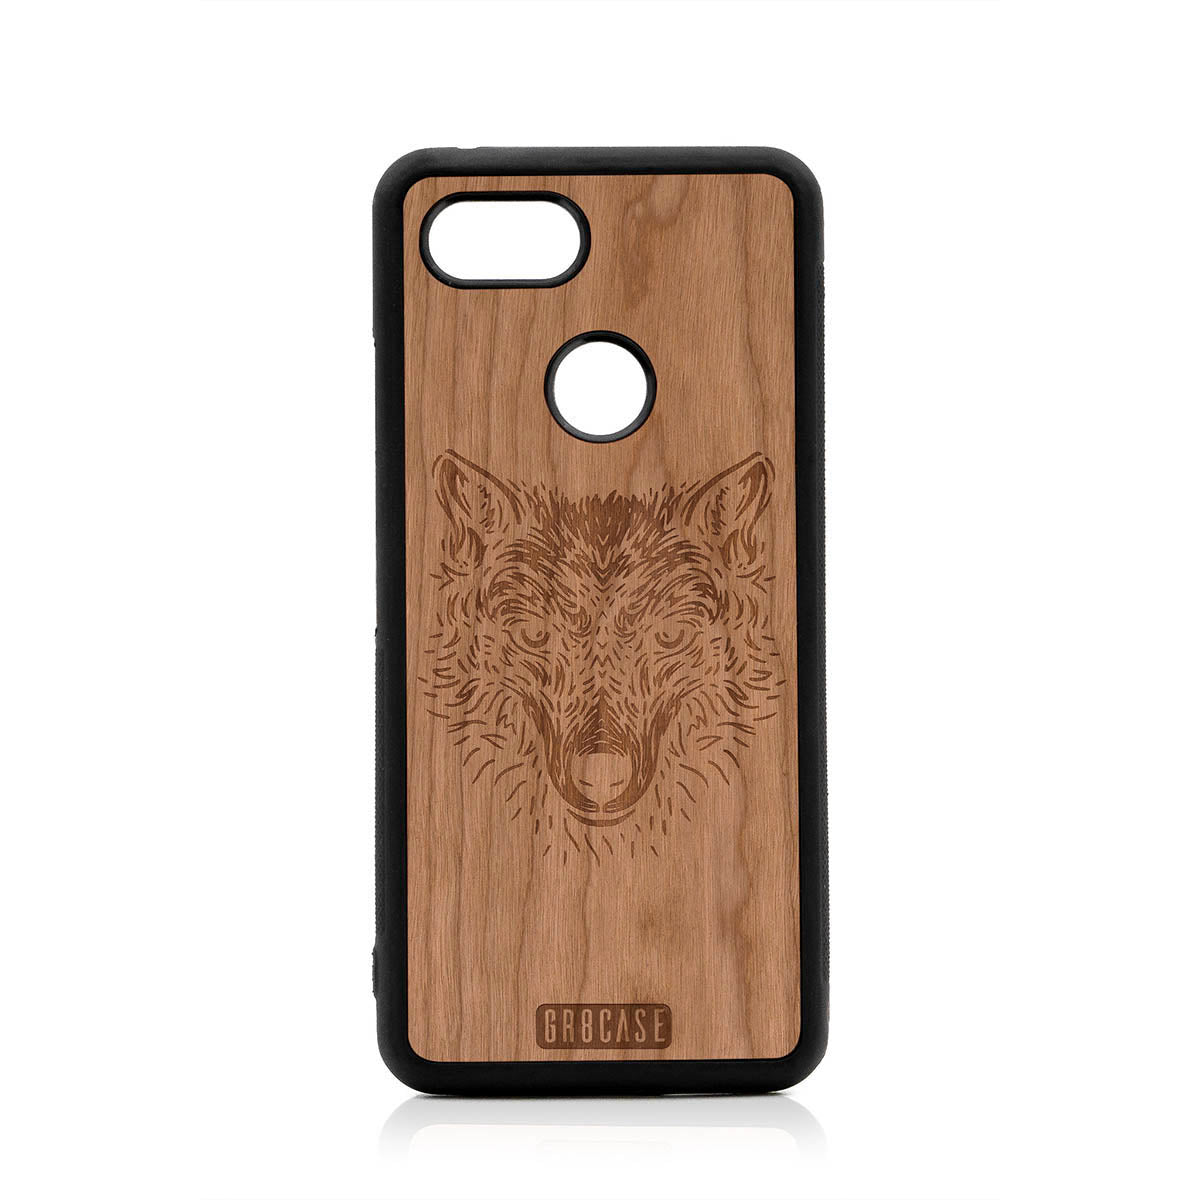 Furry Wolf Design Wood Case For Google Pixel 3